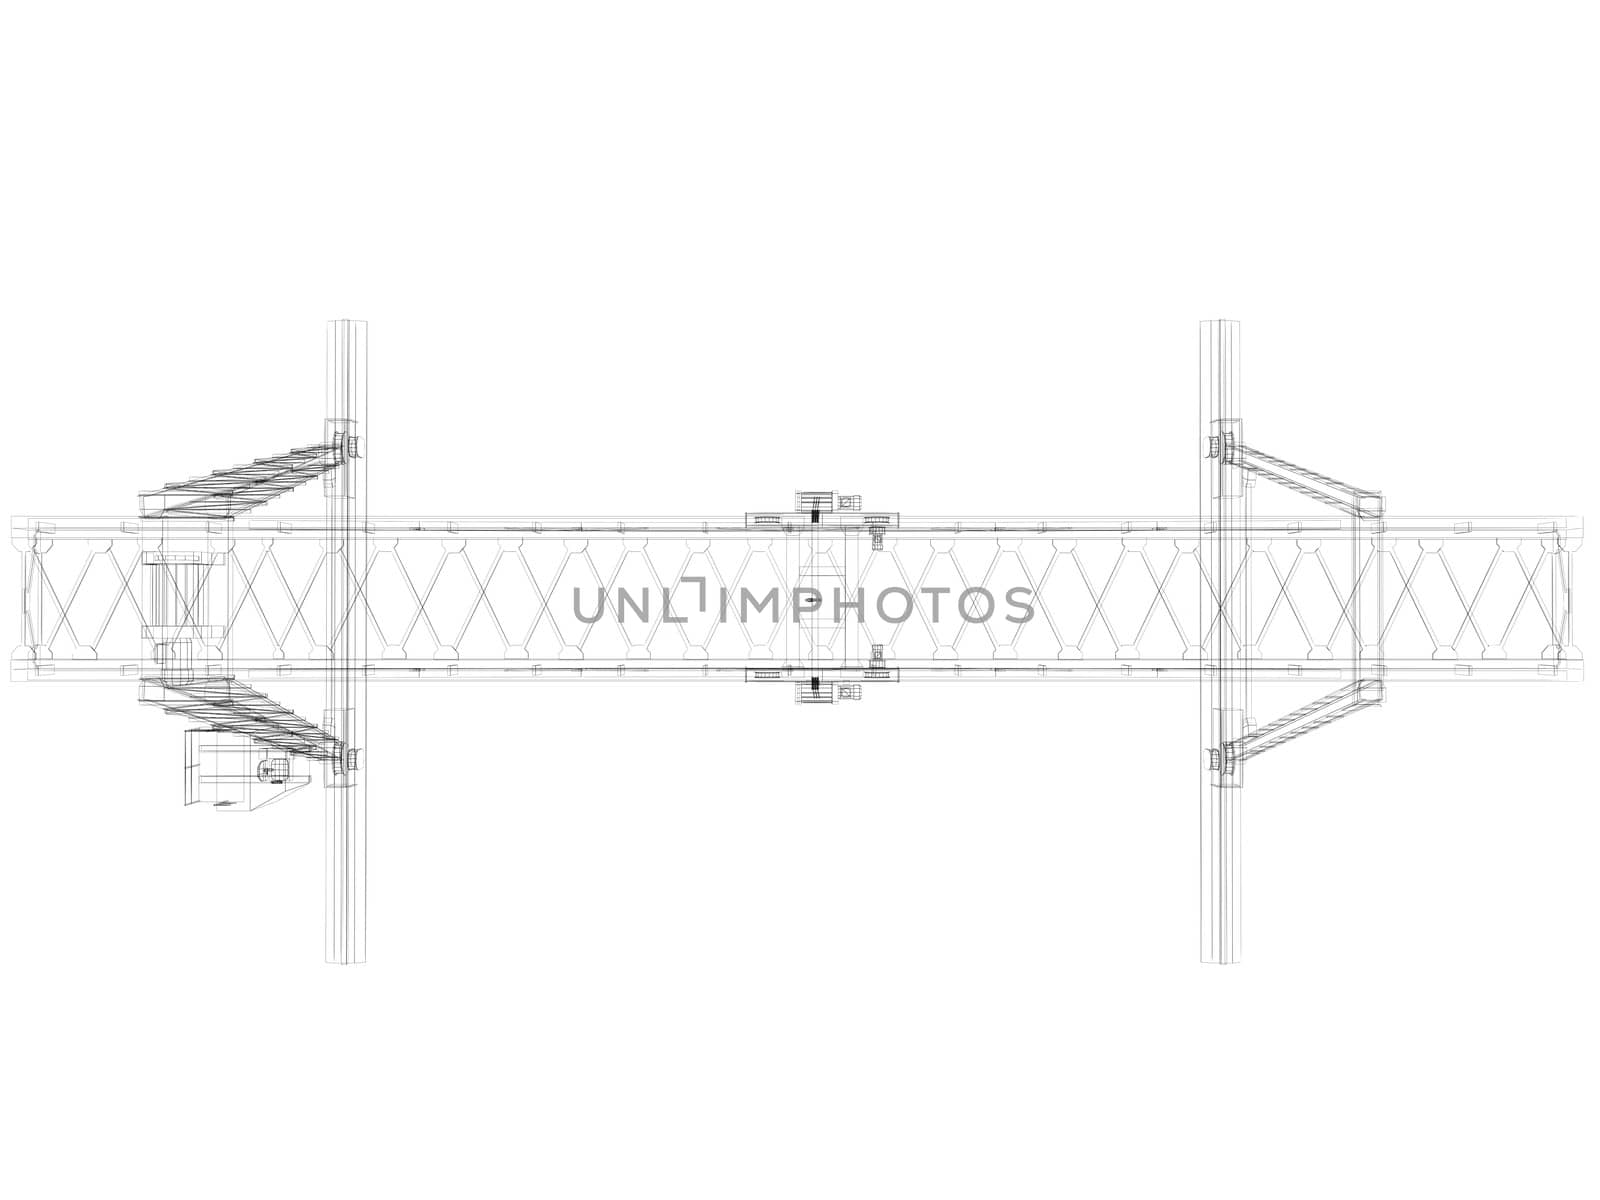 Gantry crane. Wire-frame. Isolated render on a white background